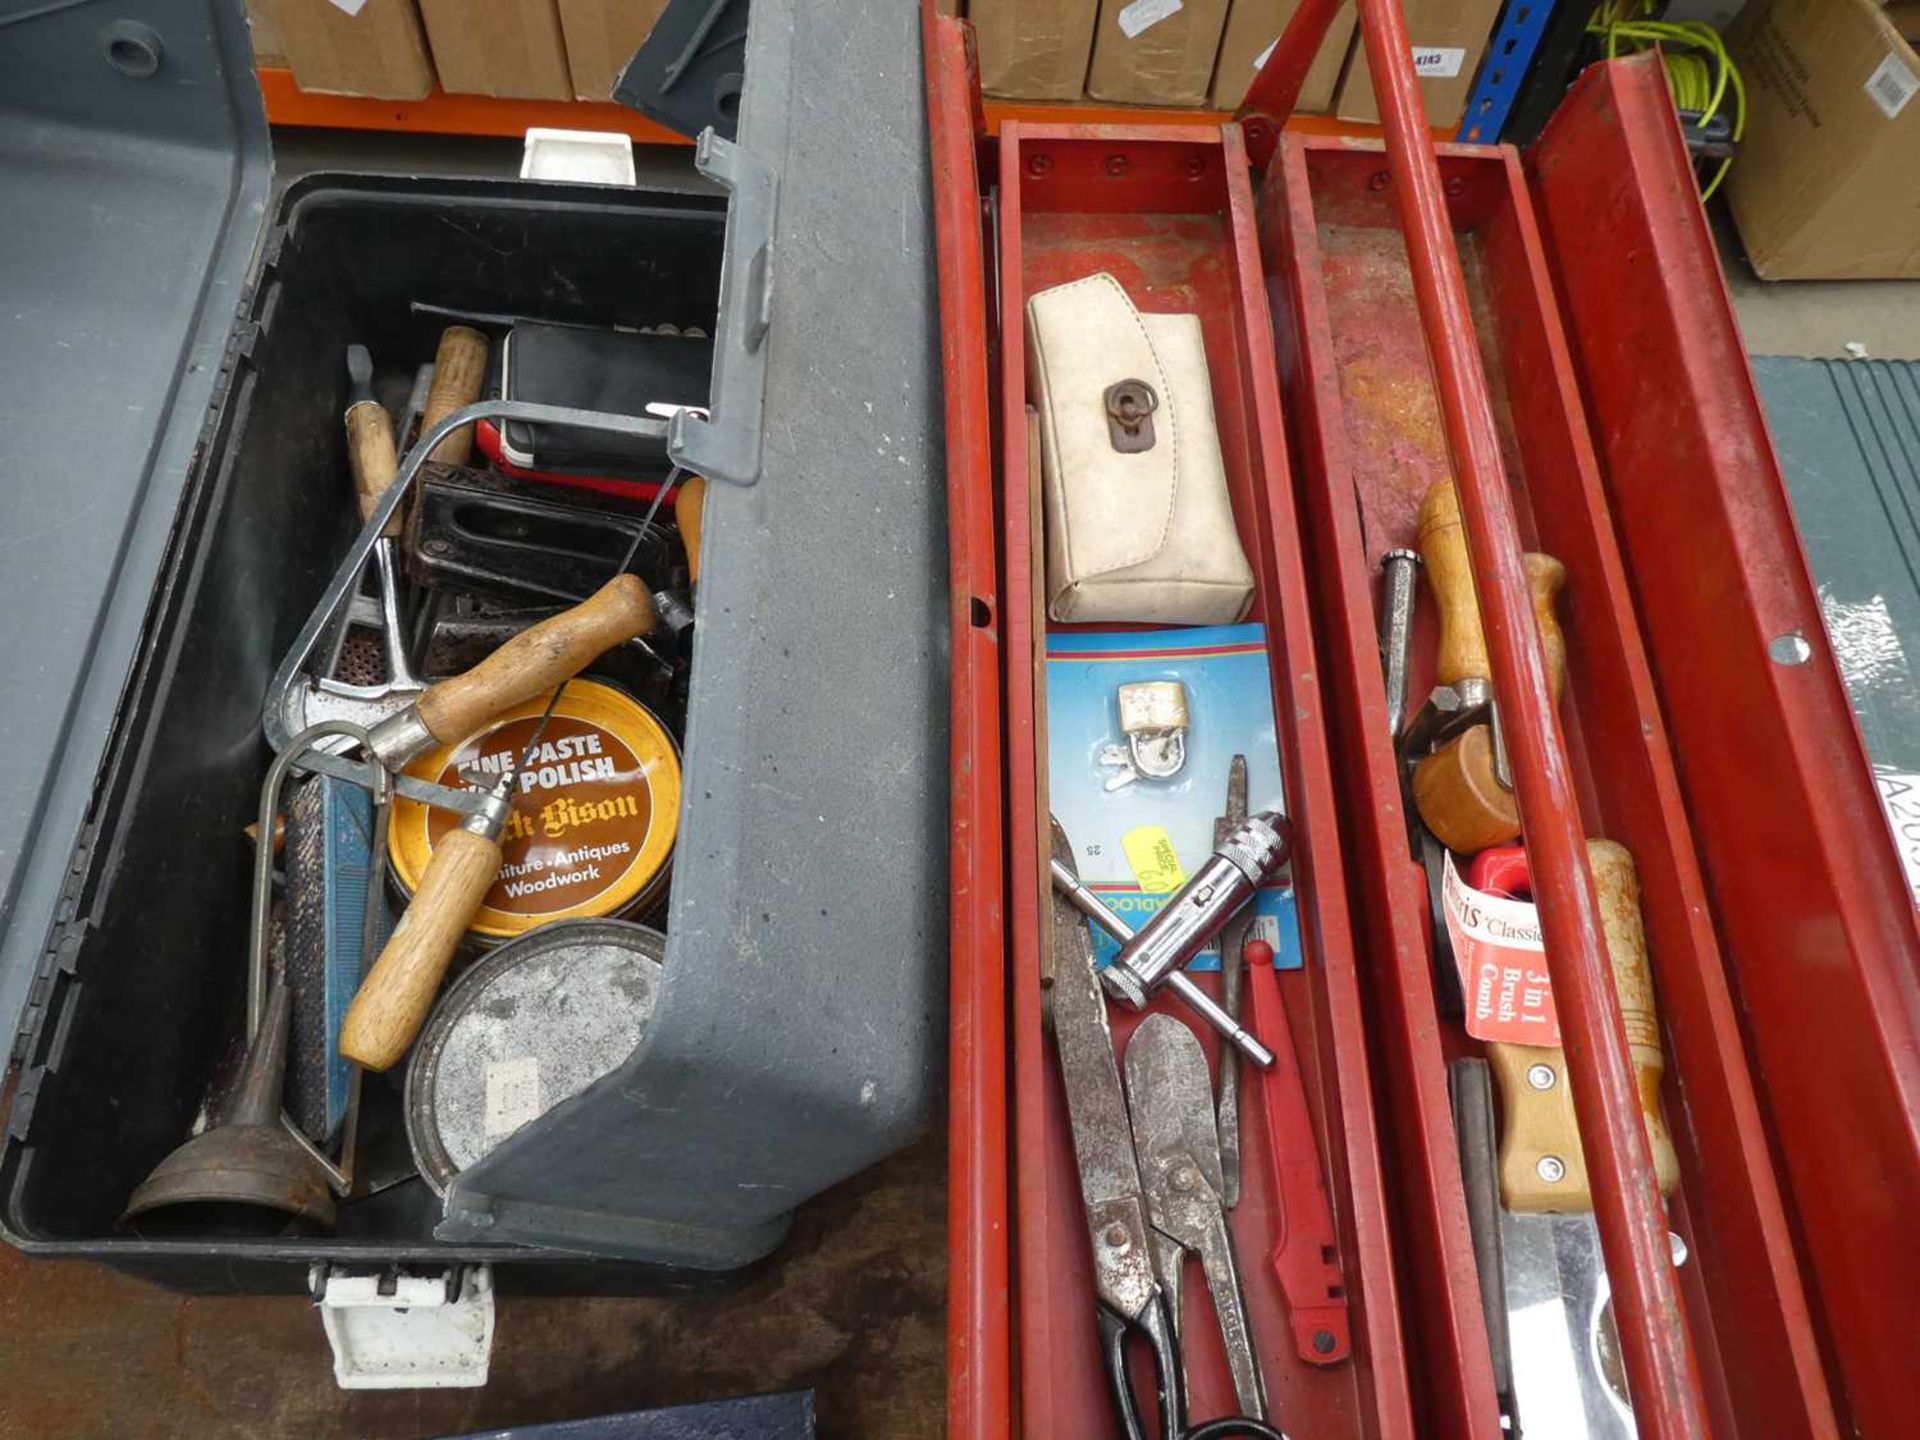 Cantilever toolbox with various tools and grey plastic toolbox with various tools